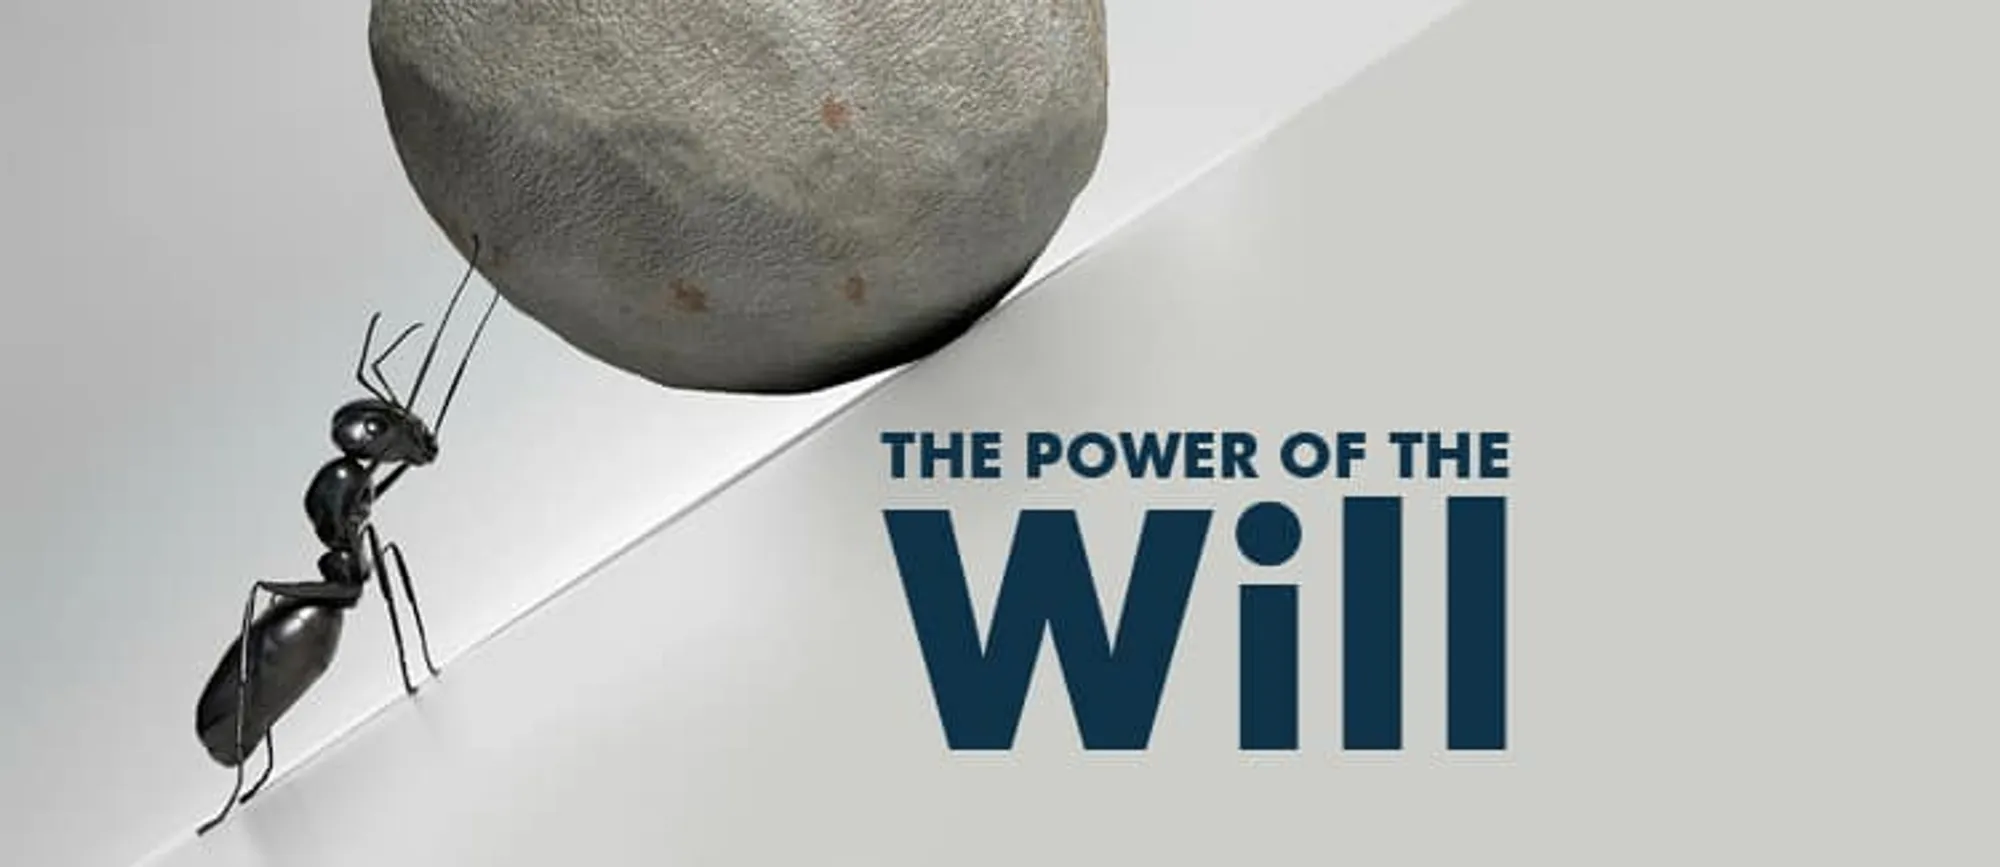 The Power of the will